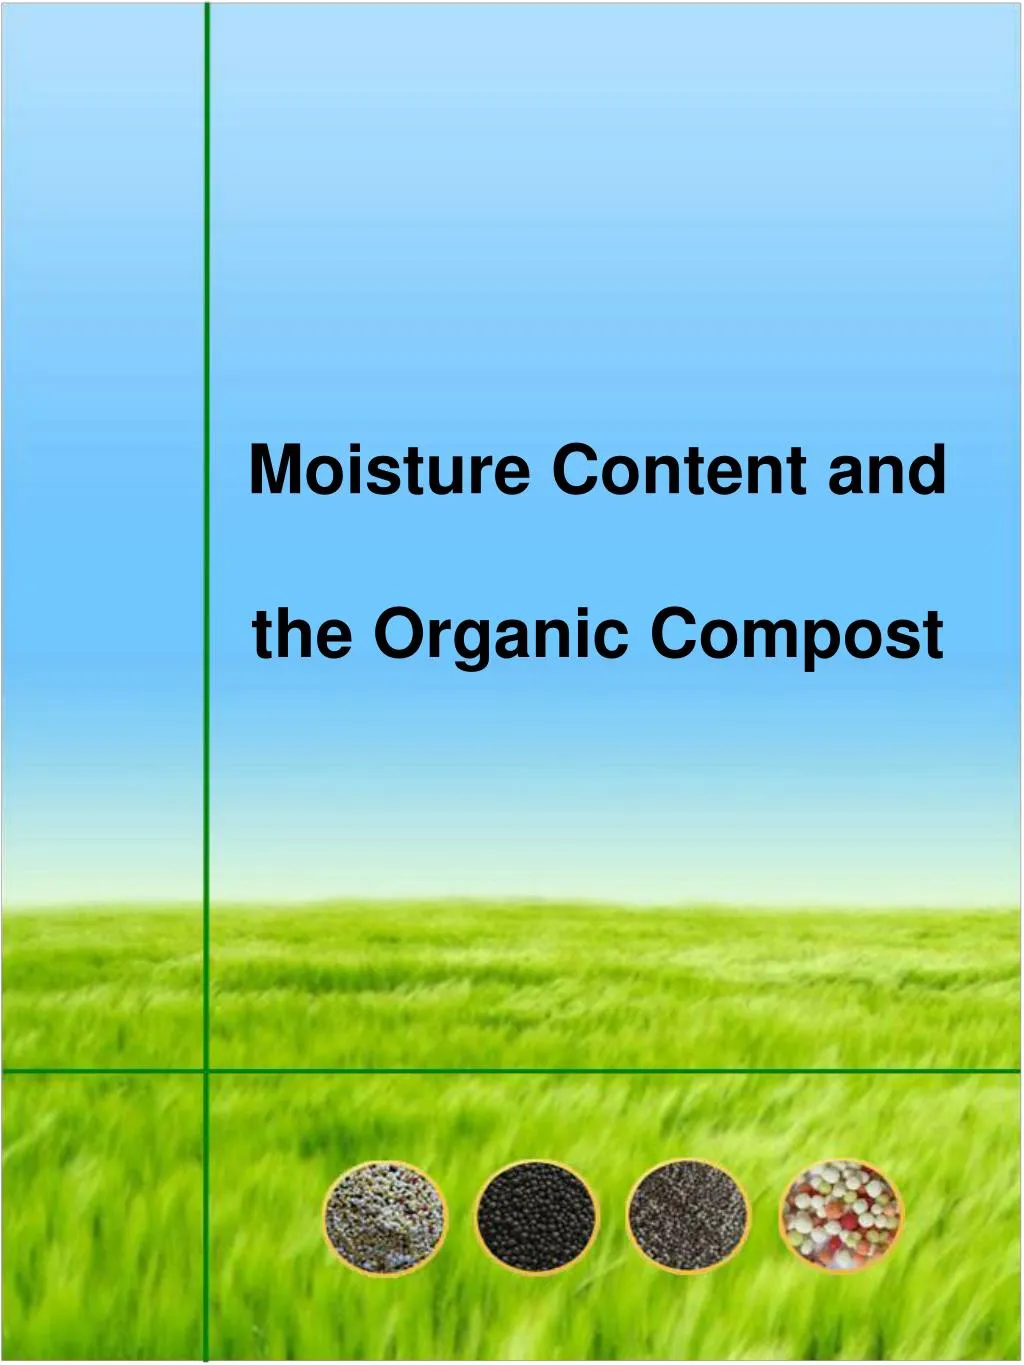 moisture content and the organic compost